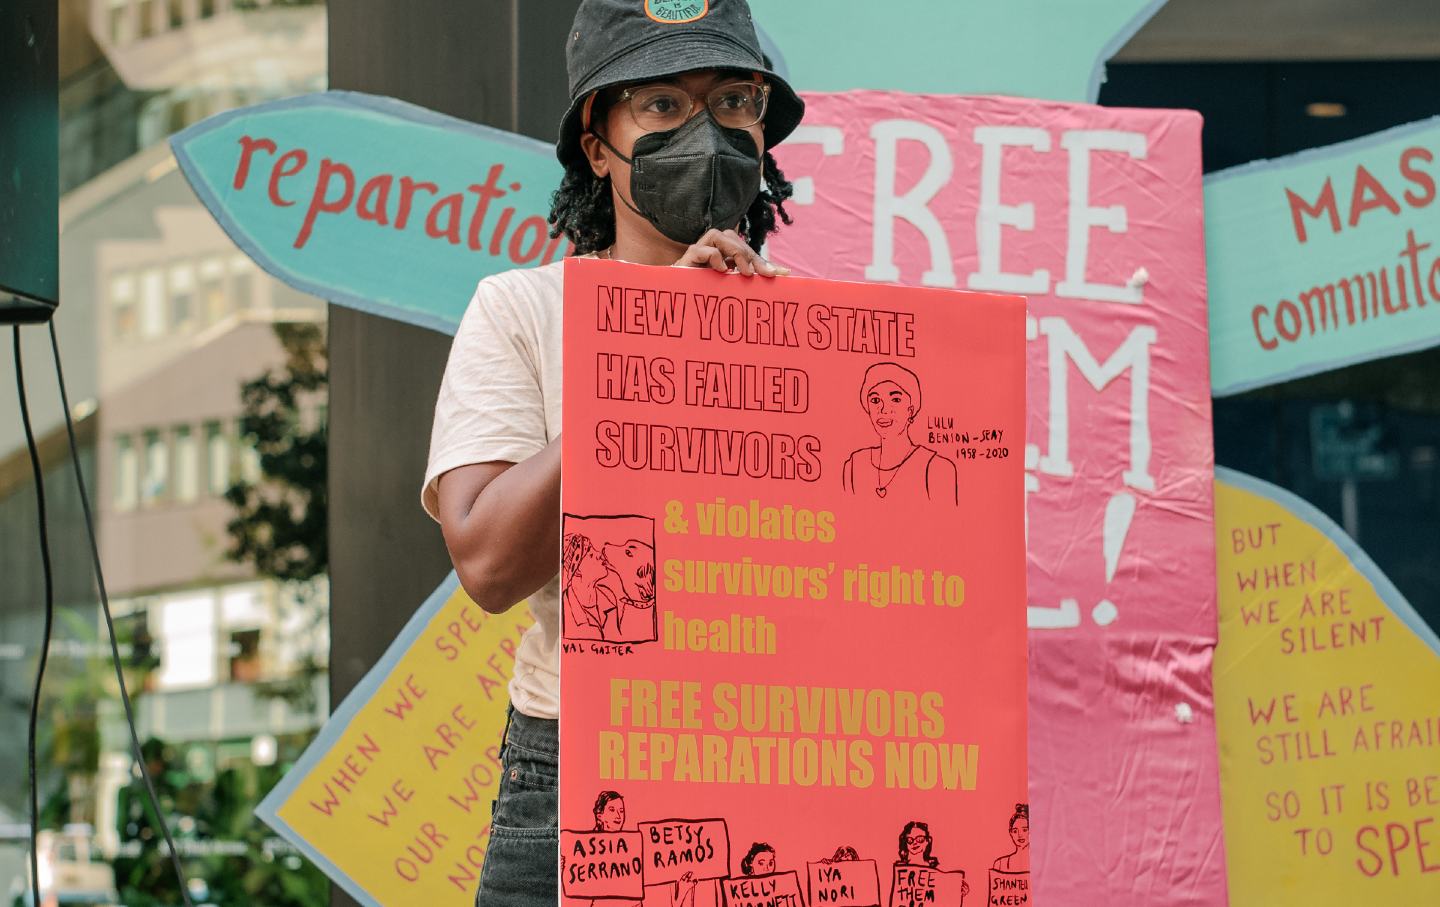 Why Activists Are Calling on Kathy Hochul to “Free Them All”